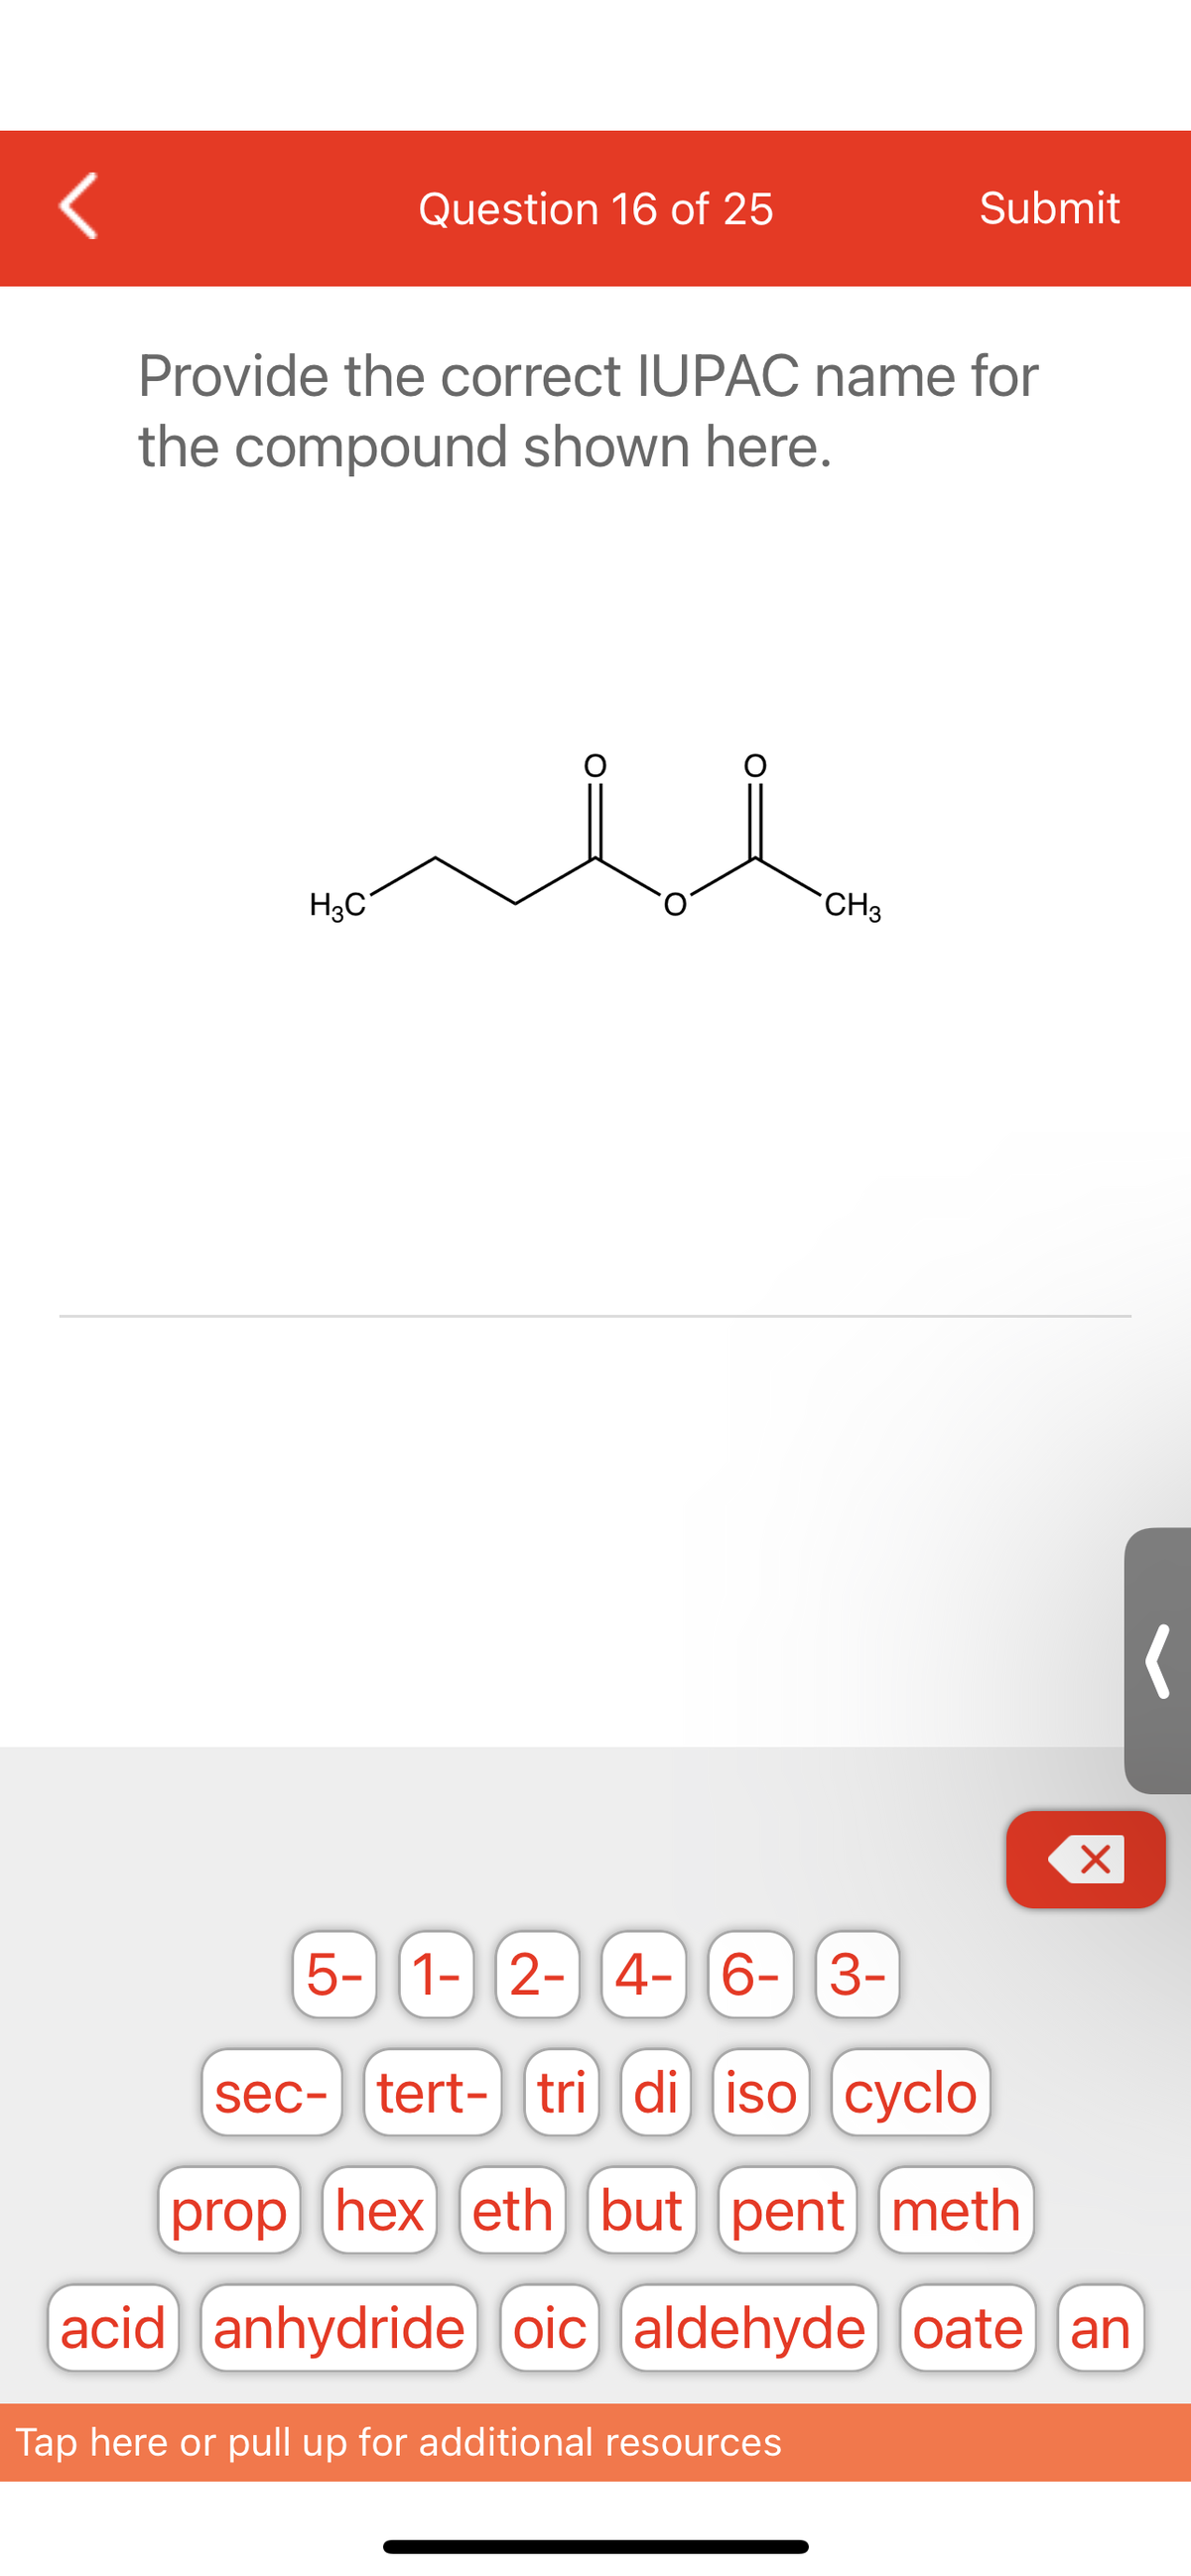 <
Question 16 of 25
H3C
Provide the correct IUPAC name for
the compound shown here.
Submit
CH3
Tap here or pull up for additional resources
X
5- 1- 2- 4- 6- 3-
sec- tert- tri di iso cyclo
prop hex) eth but pent meth
acid anhydride oic) (aldehyde) [oate an